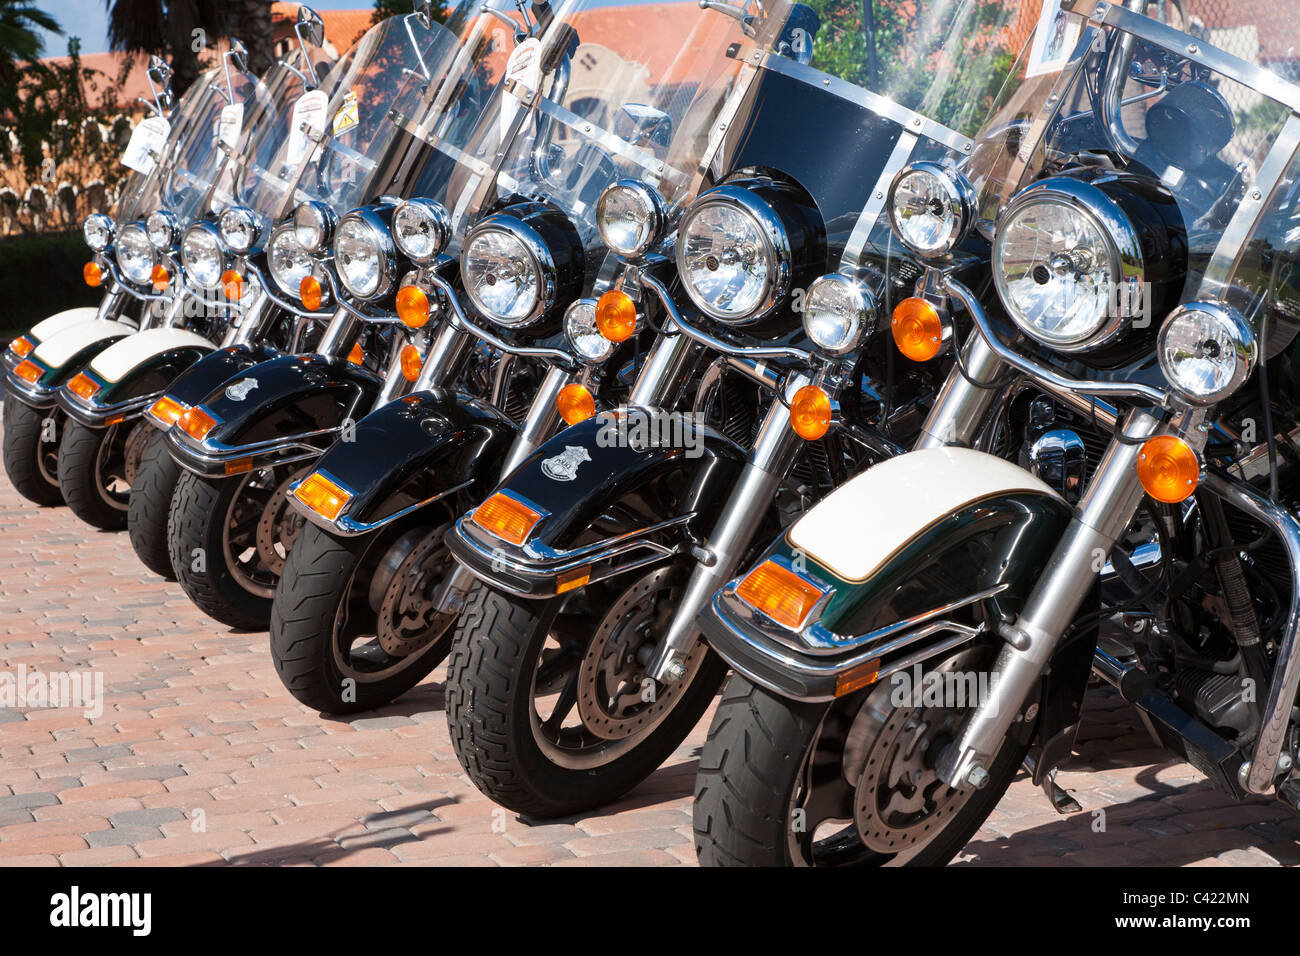 Harley Davidson Police motorcycles in a line for sale at the Bruce Rossmeyer Harley Davidson Center in Daytona, Florida, USA Stock Photo